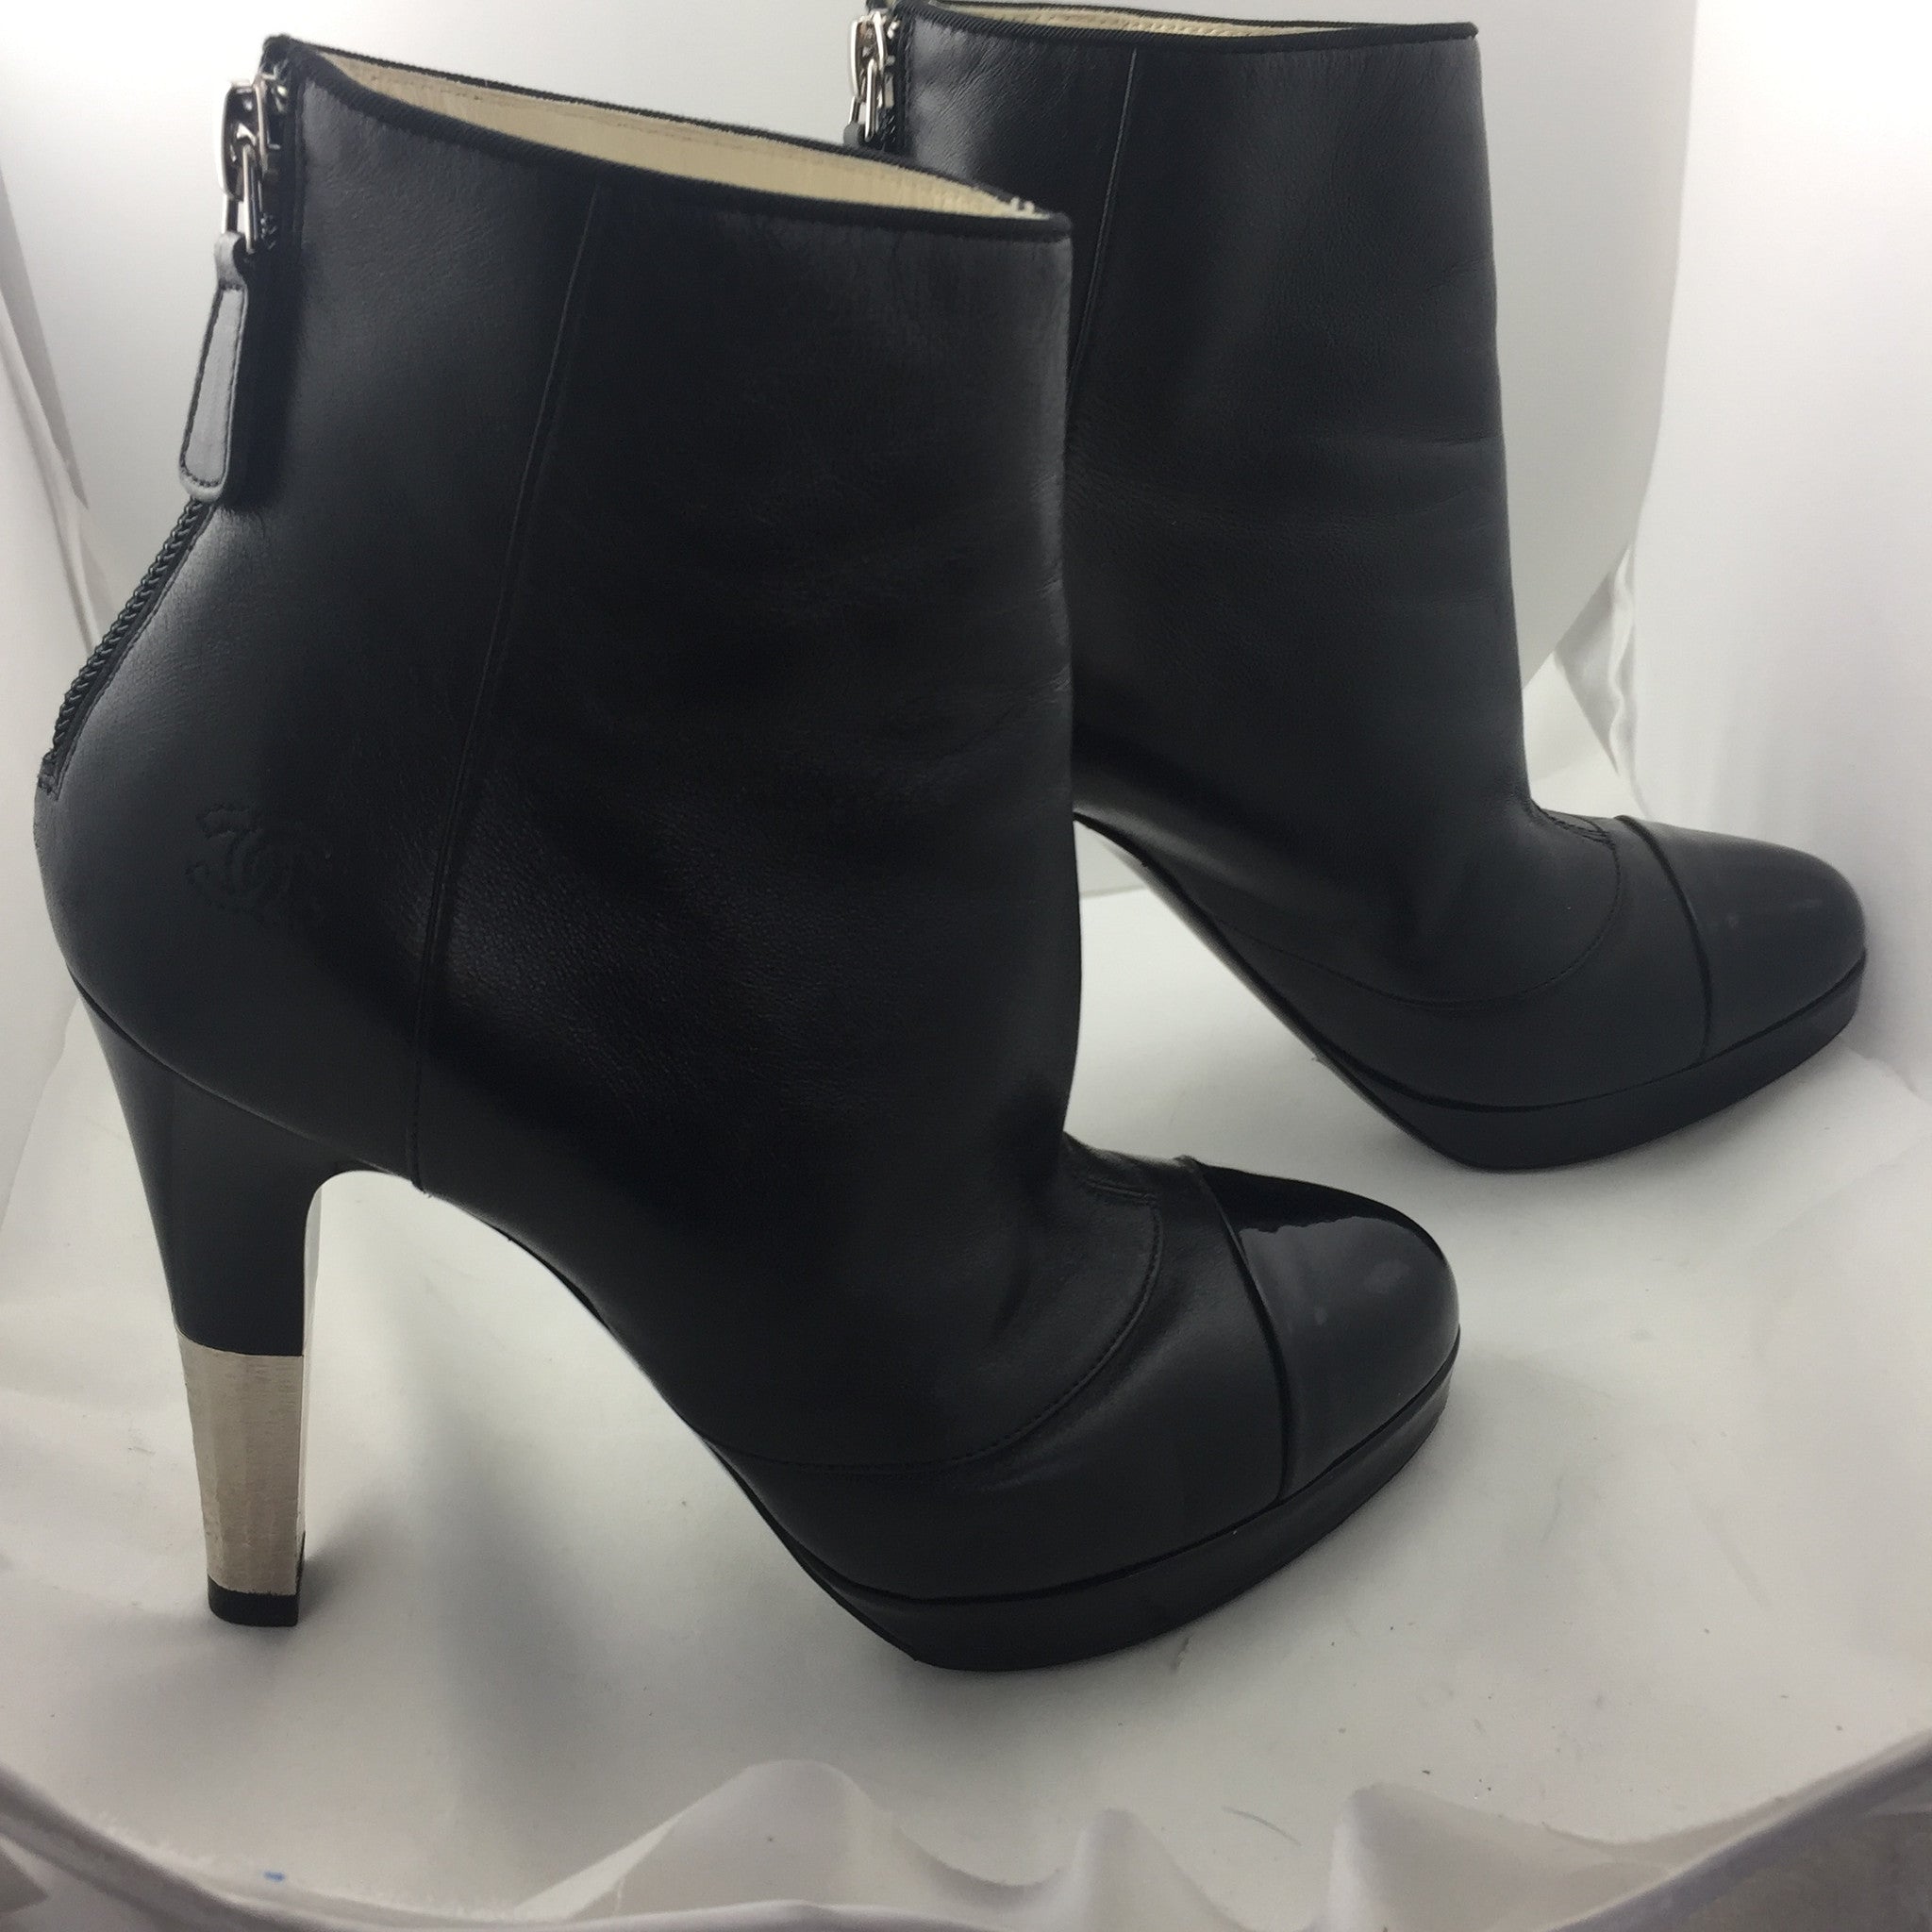 Chanel boots - New Neu Glamour | Preloved Designer Jewelry, Shoes &  Handbags.